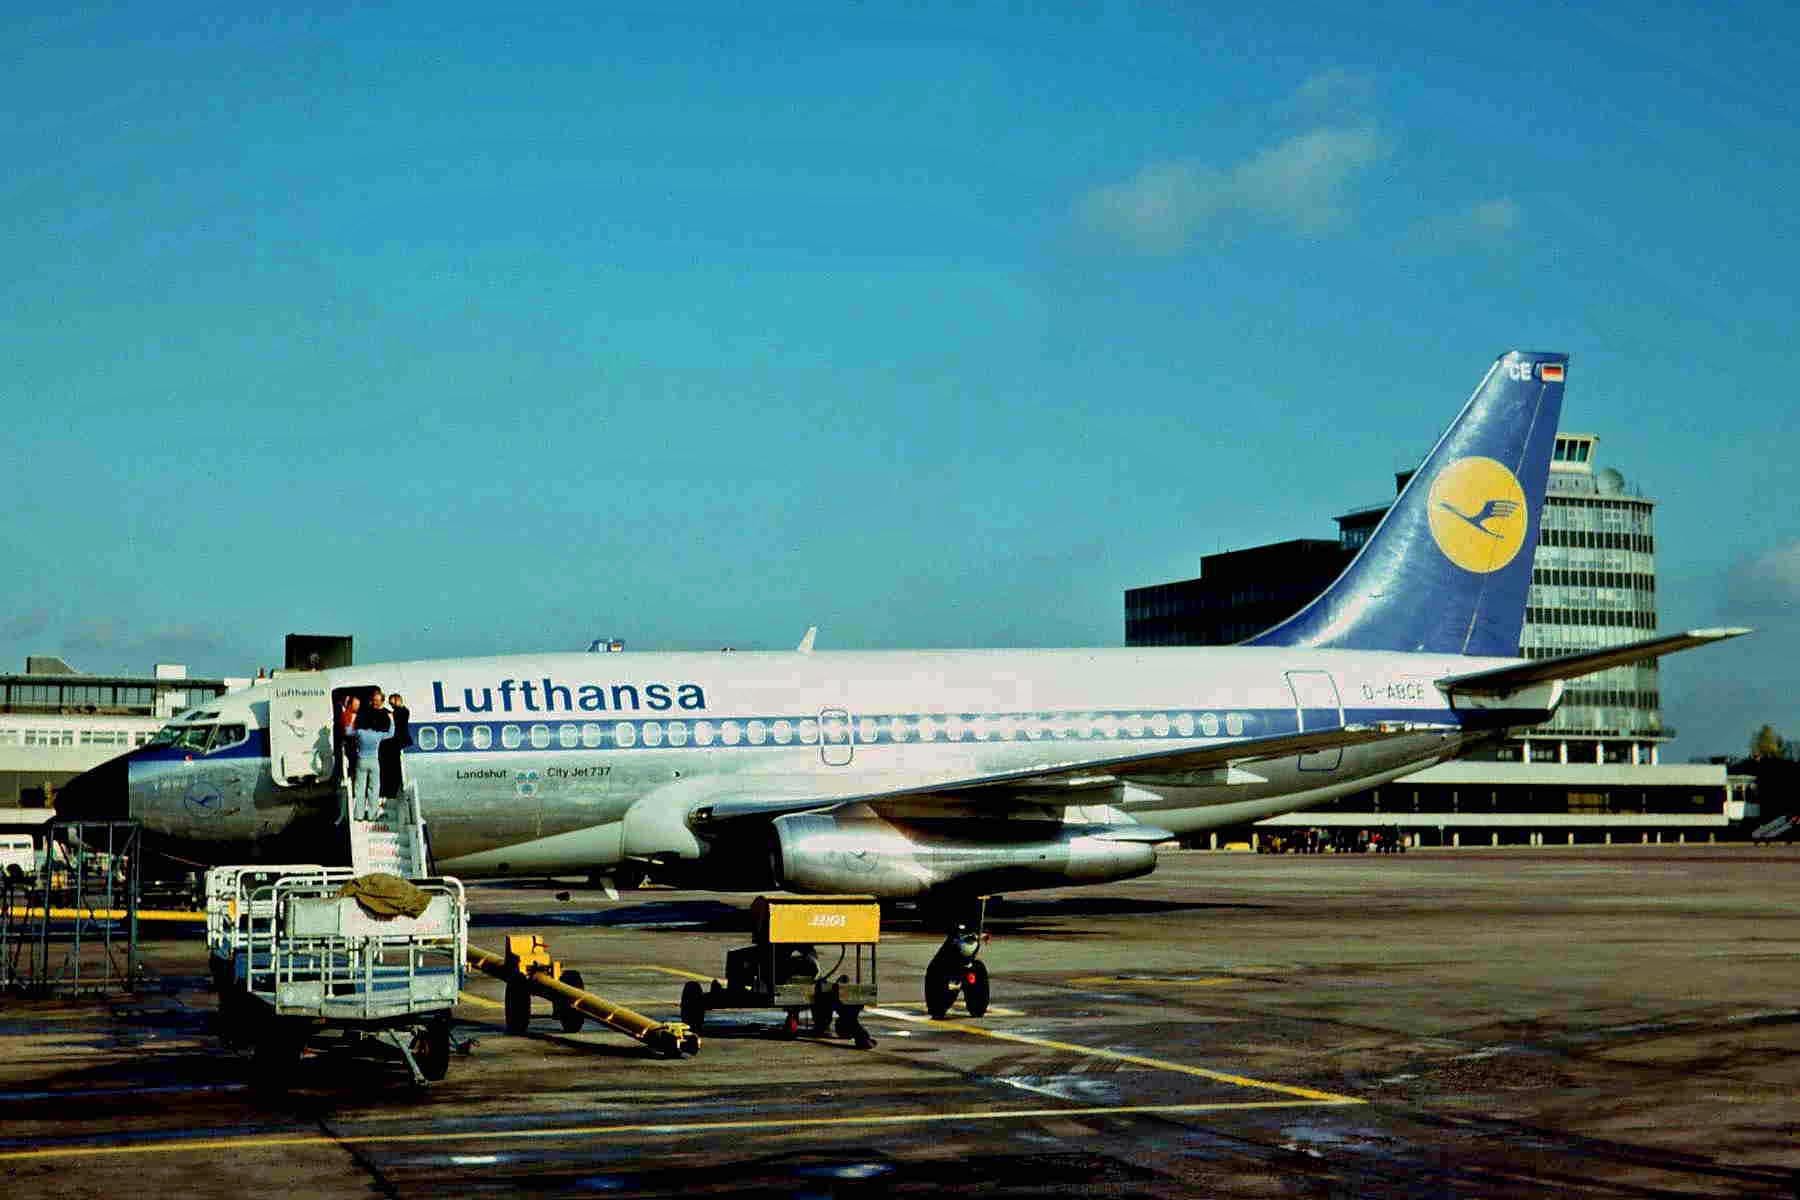 Landshut (here at Manchester airport in 1975), the very Lufthansa-aircraft hijacked to Mogadishu on 13th October 1977 as Flight LH 181 from Palma de Mallorca to Frankfurt / Main. Source: Wikimedia Commons, CC BY-SA 3.0.